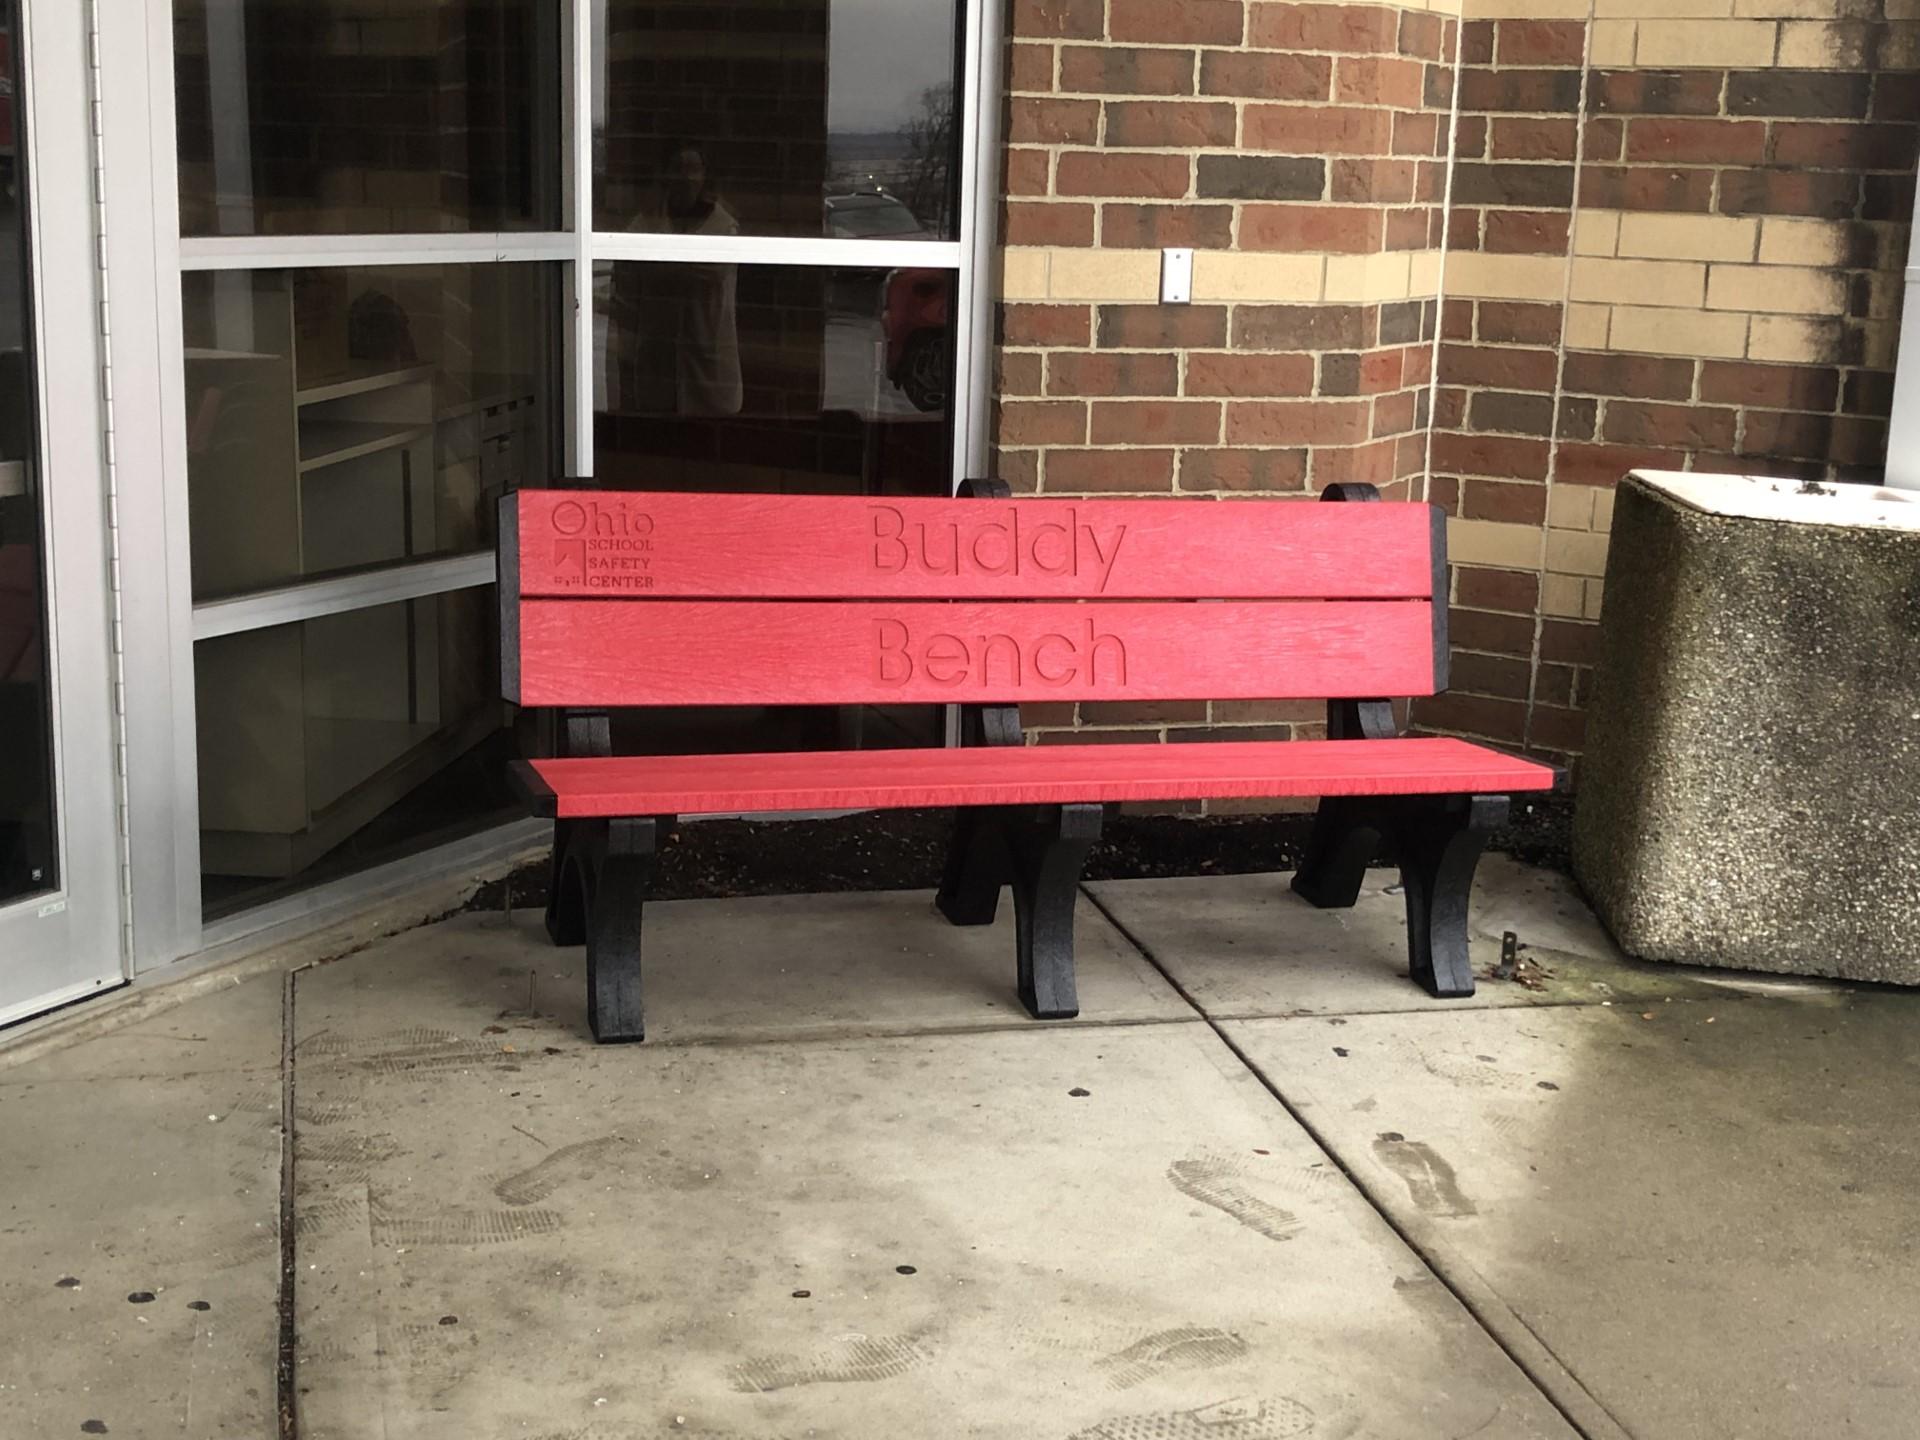 Photo of the Buddy Bench